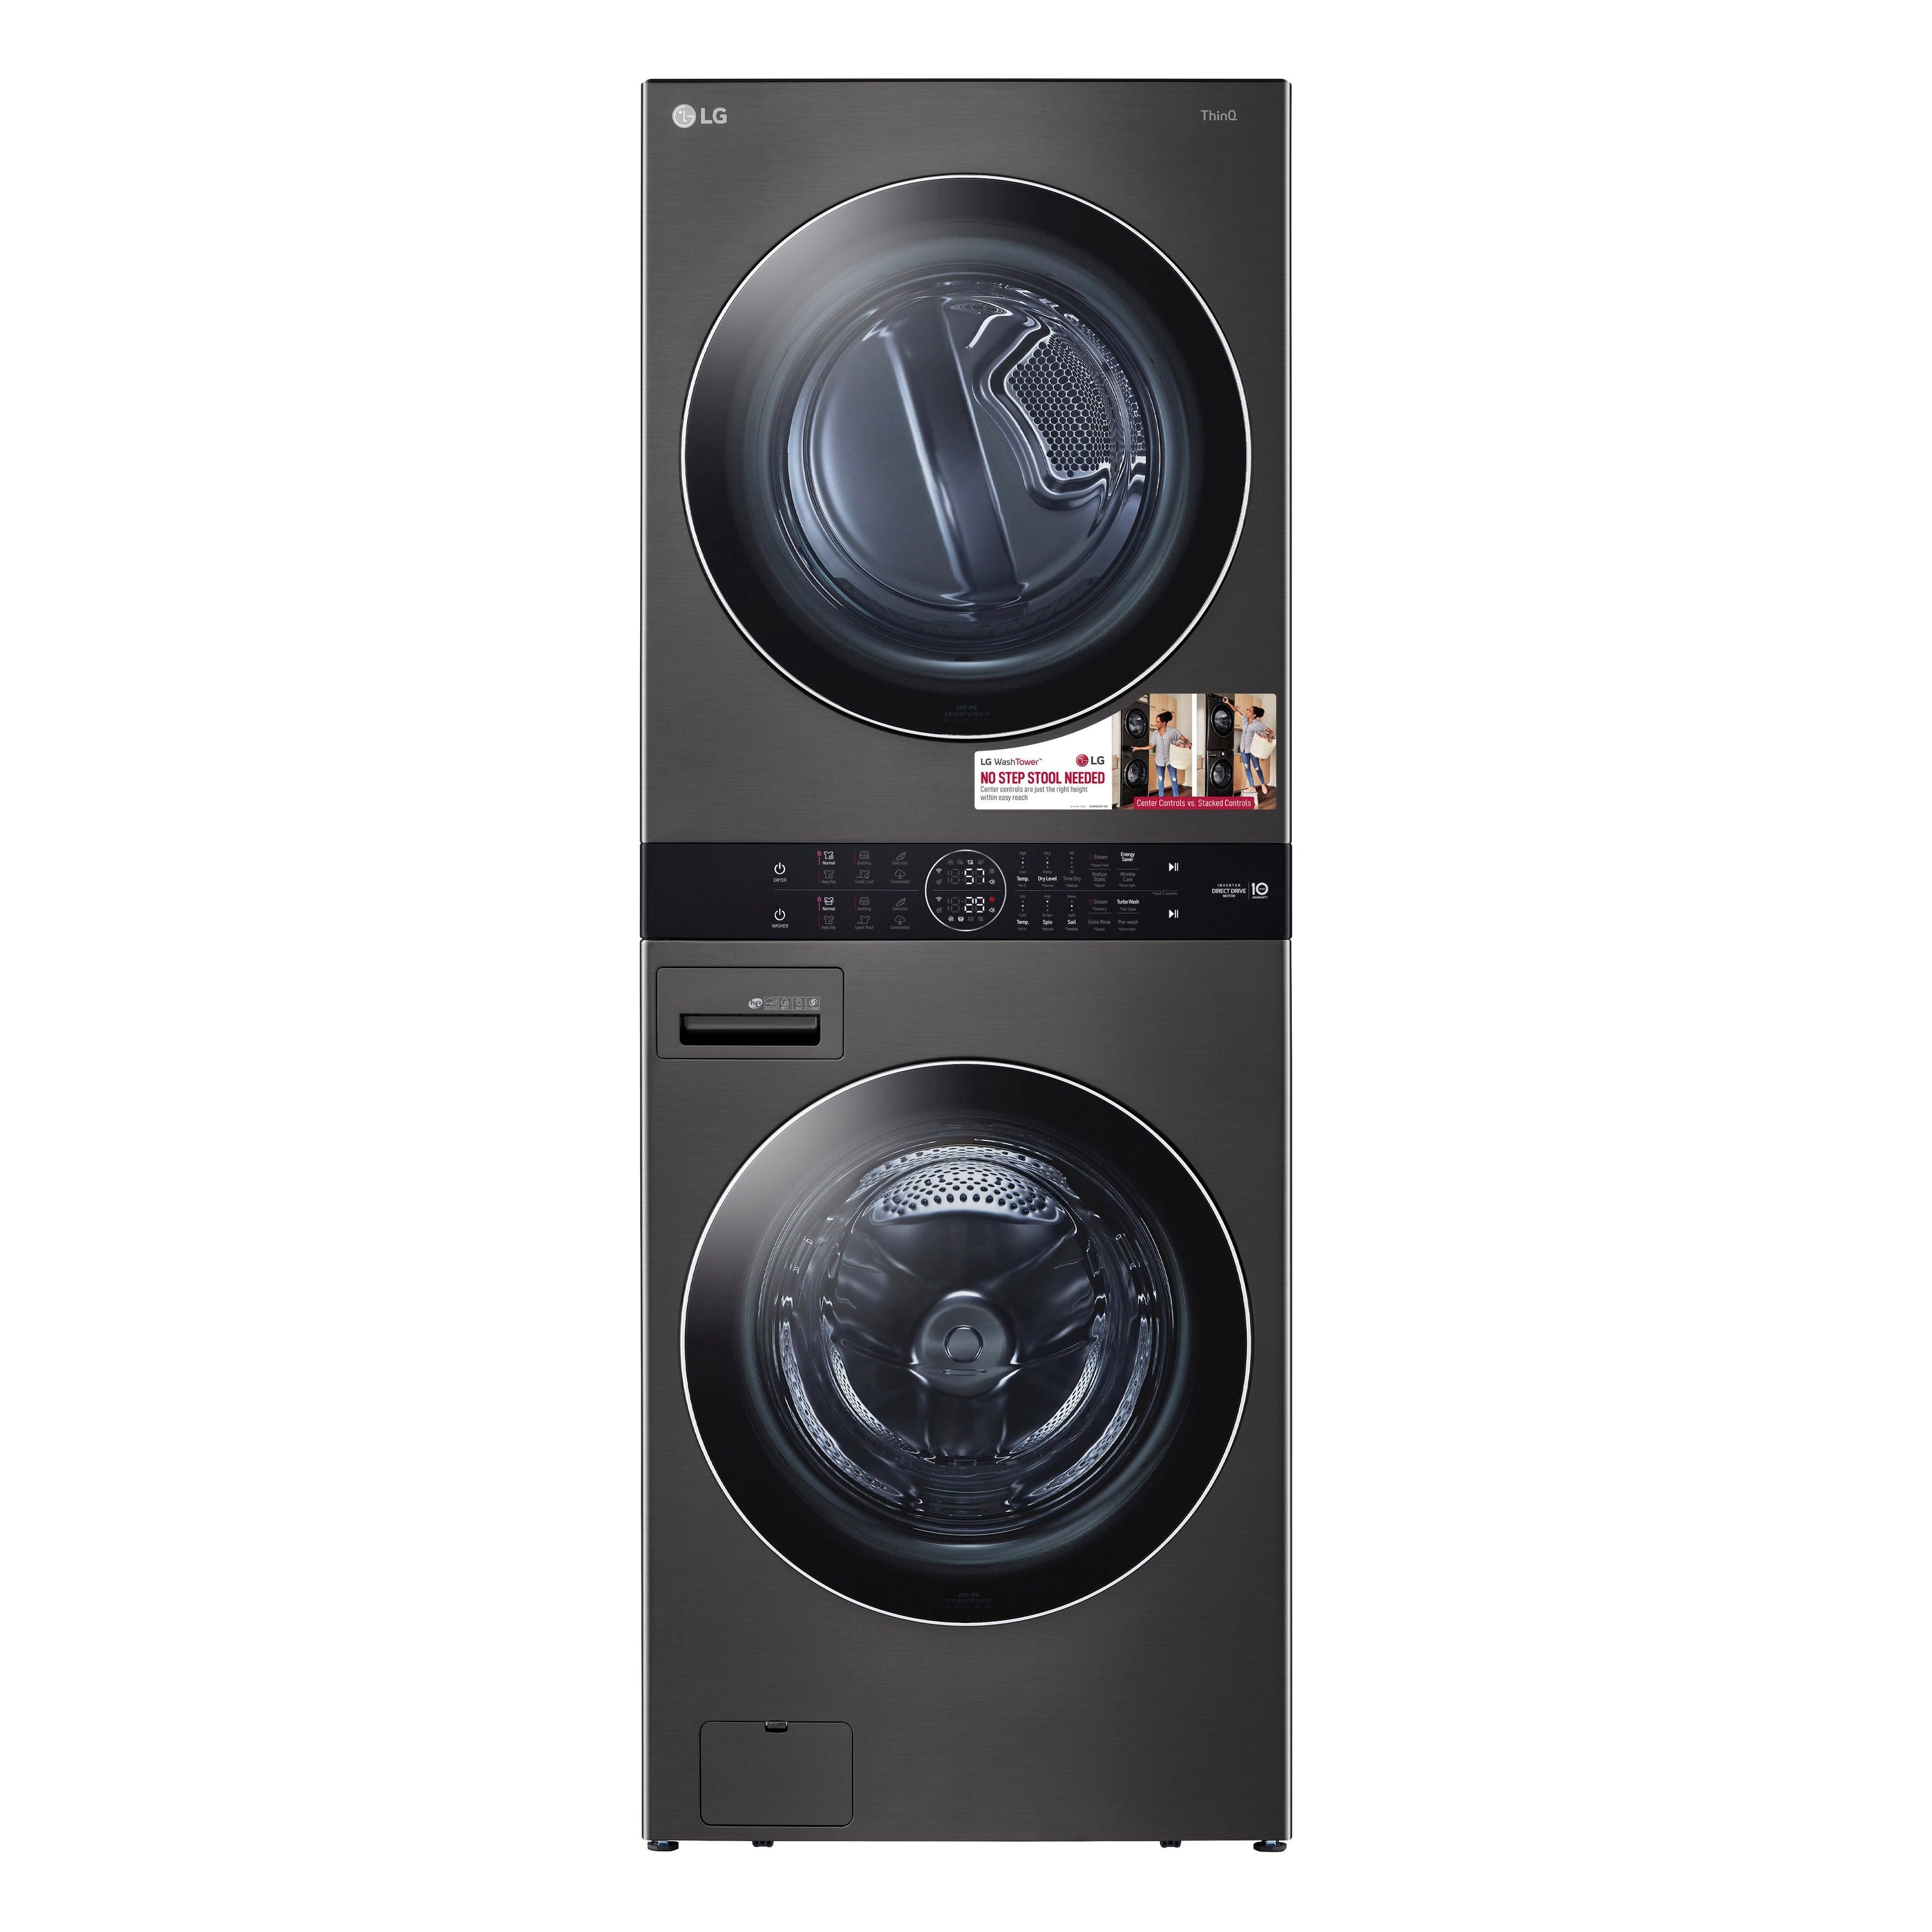 washers and dryers brands